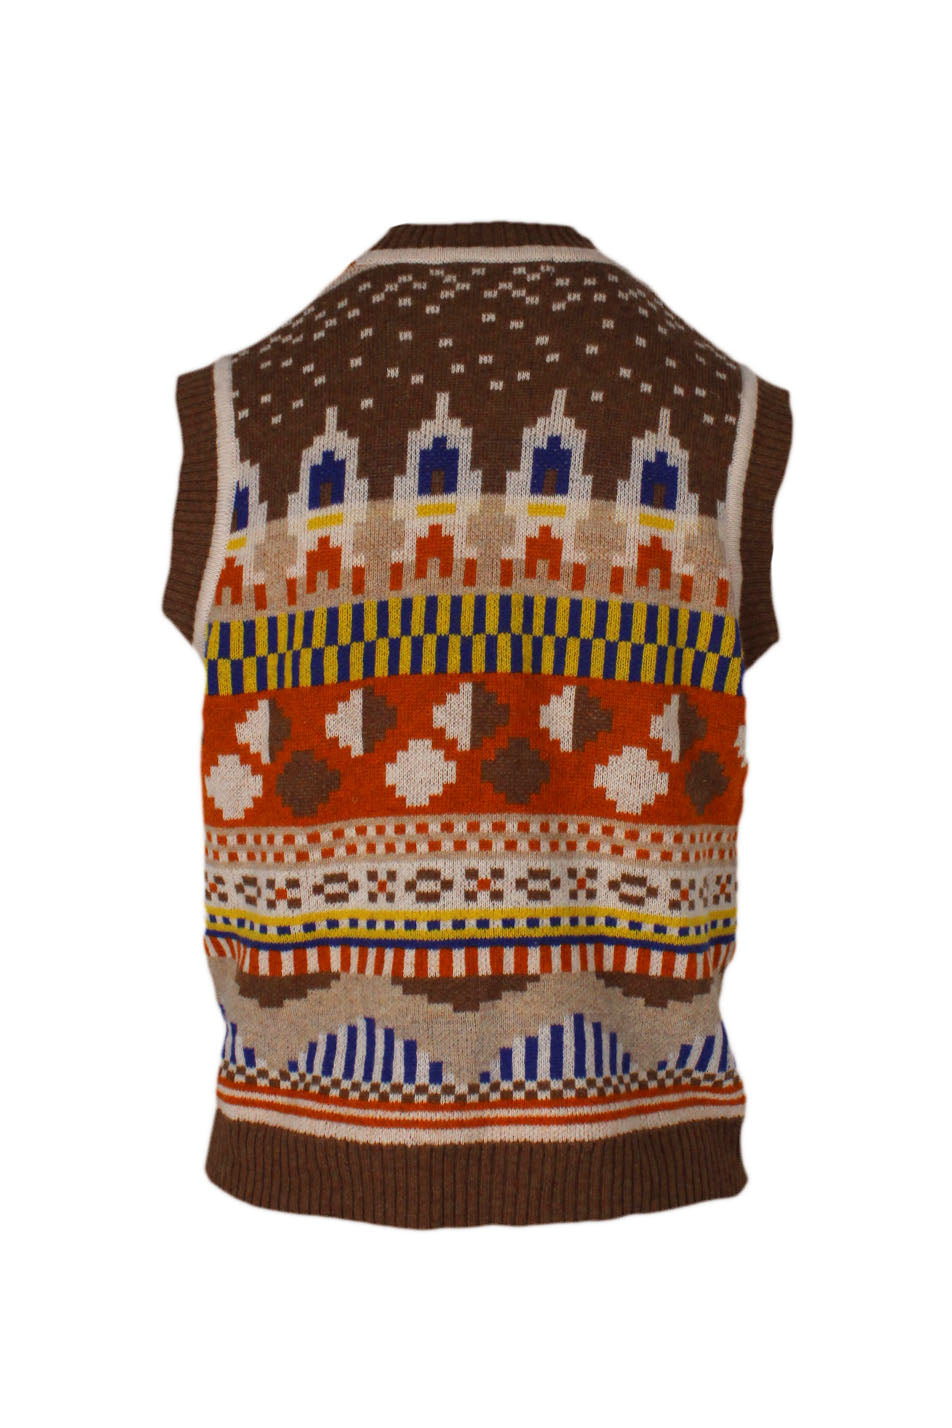 back view of henrik vibskov multi-color pattern sweater vest. features crew neckline, brown ribbed hem throughout, and multicolor geometric patterns 